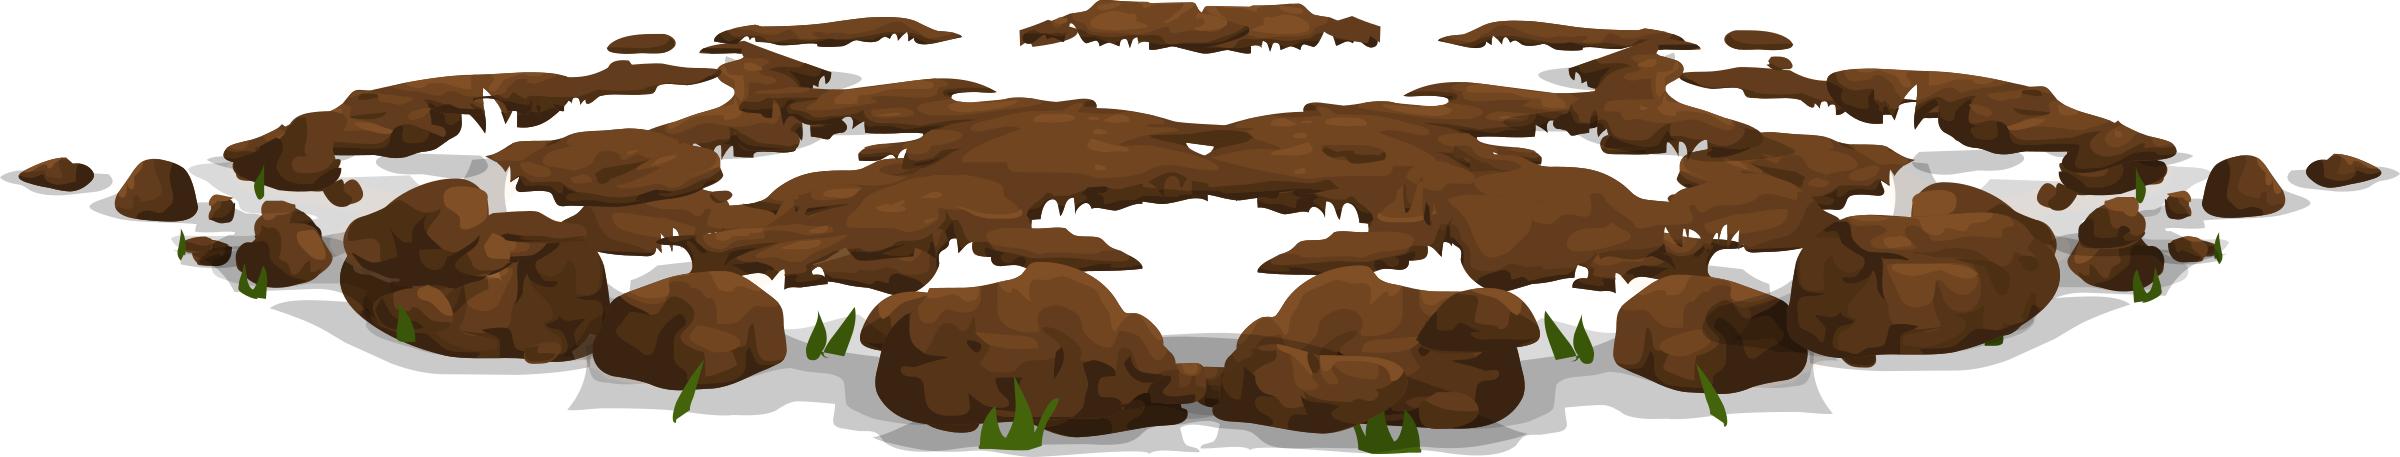 Harvestable Resources Dirt Pile png